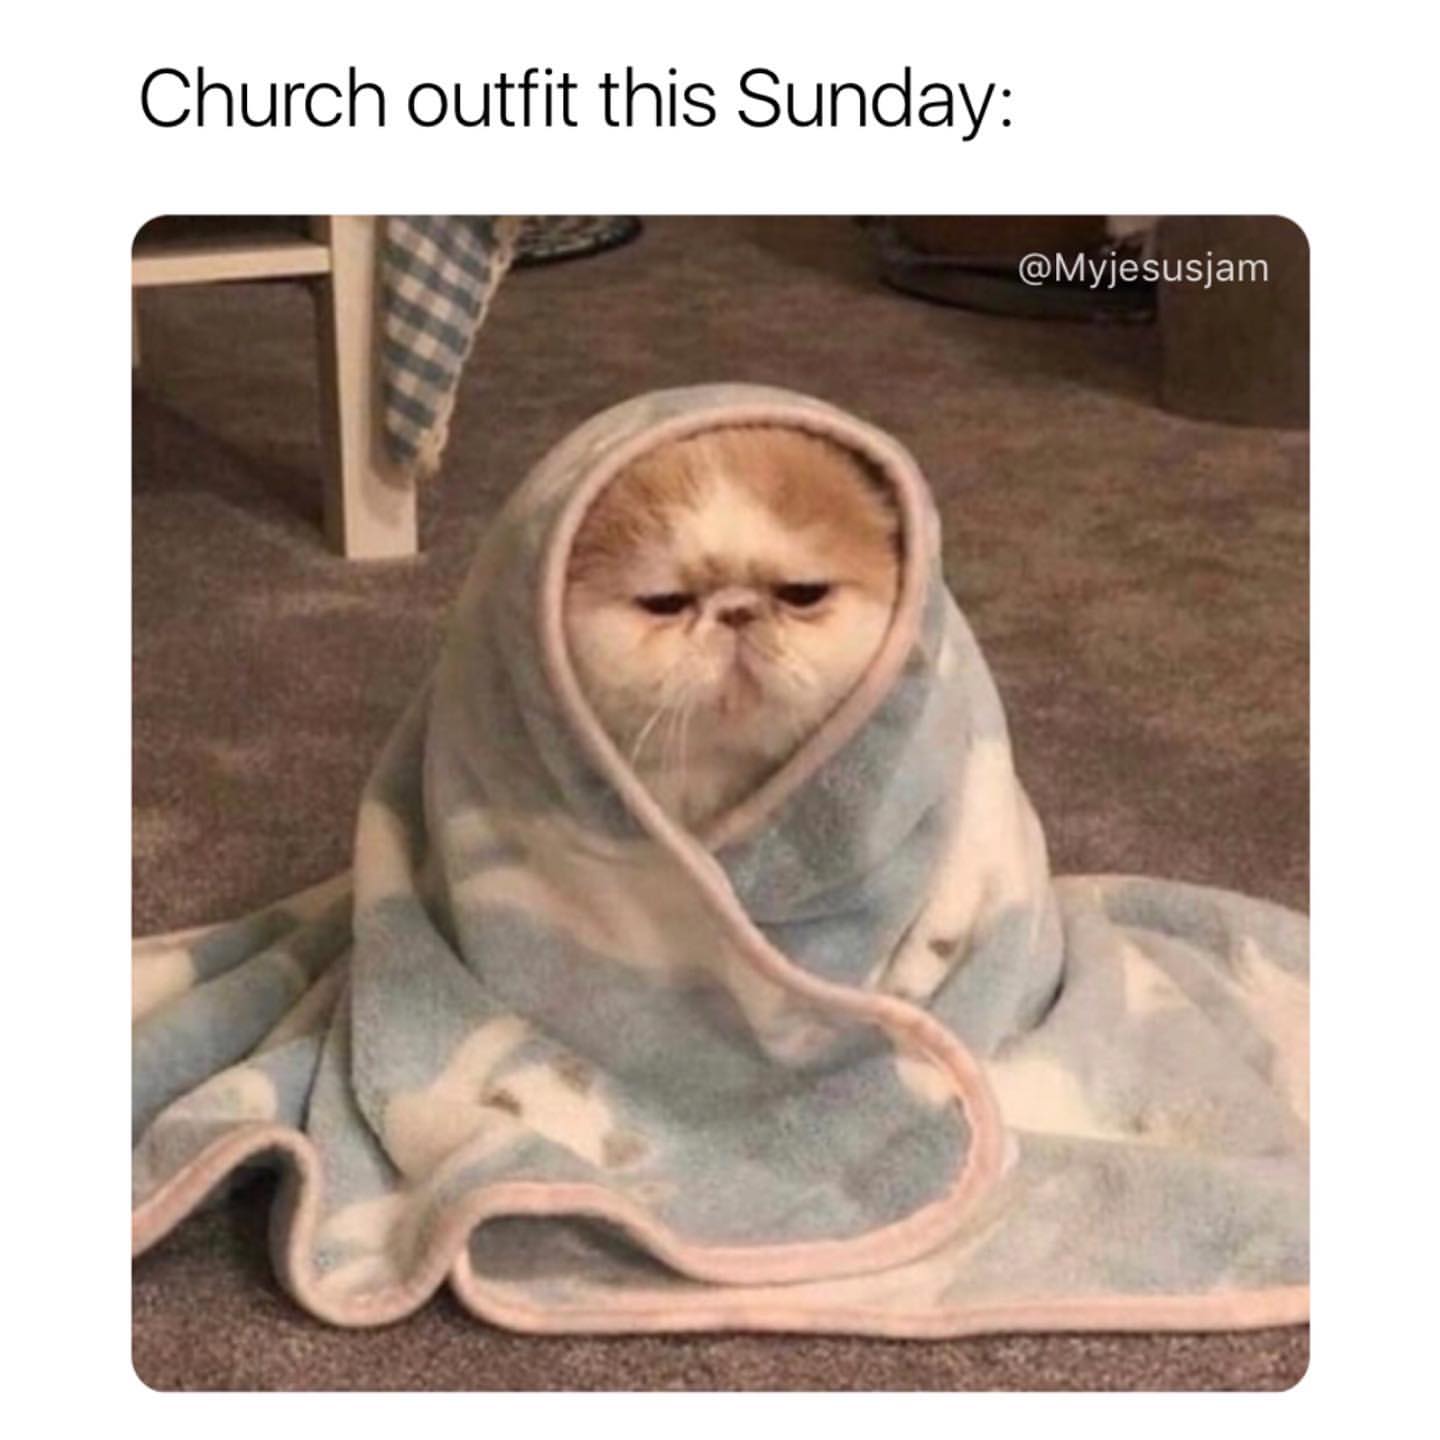 Church outfit this Sunday: